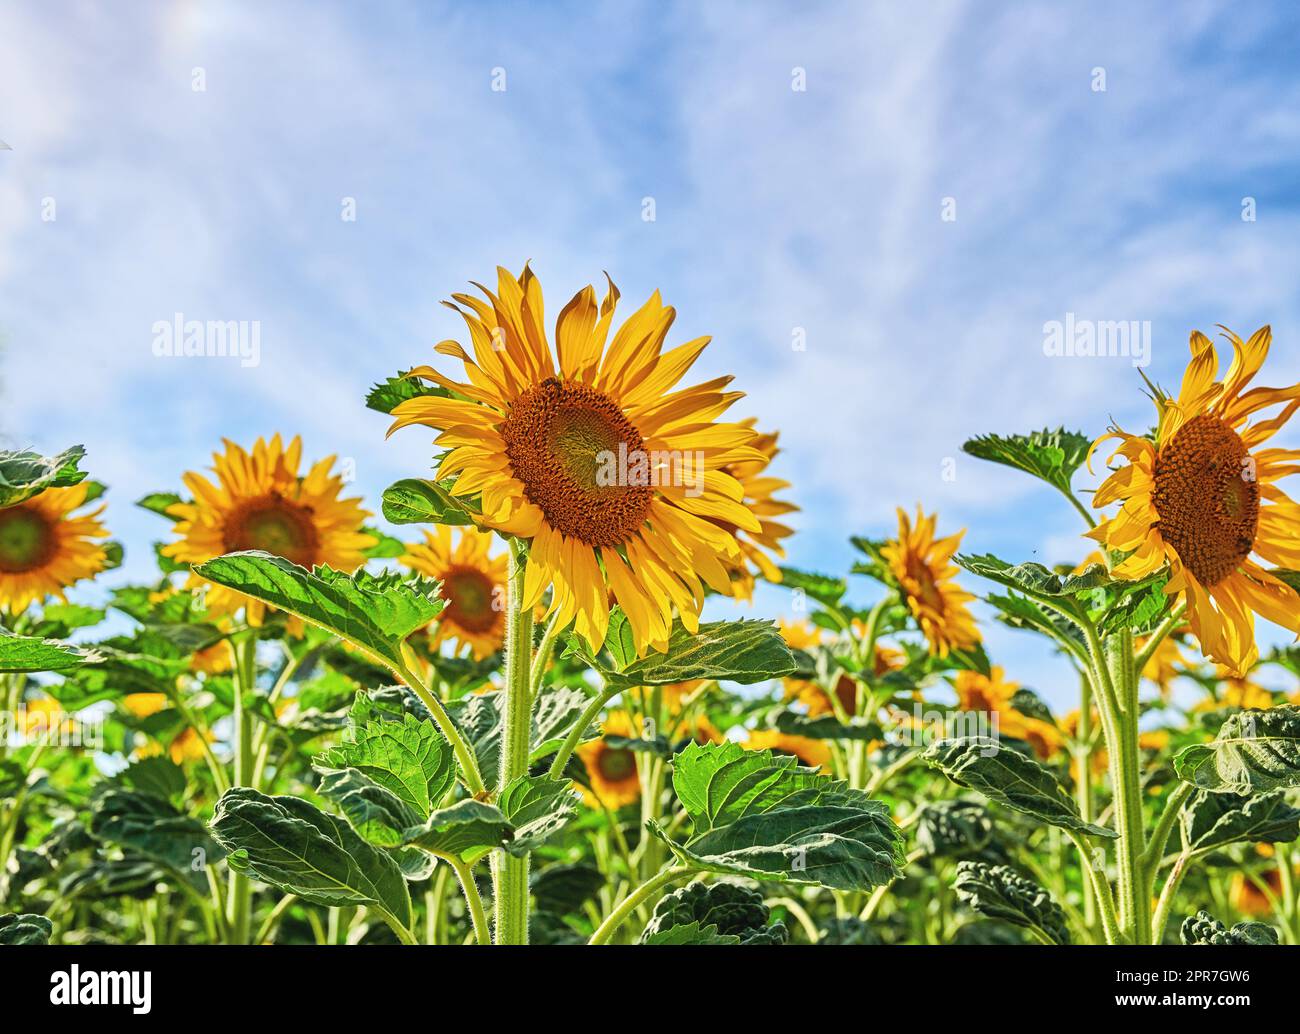 Mammoth russian sunflowers growing in a field or garden with a cloudy blue sky background. Closeup of beautiful tall helianthus annuus with vibrant yellow petals blooming and blossoming in spring Stock Photo